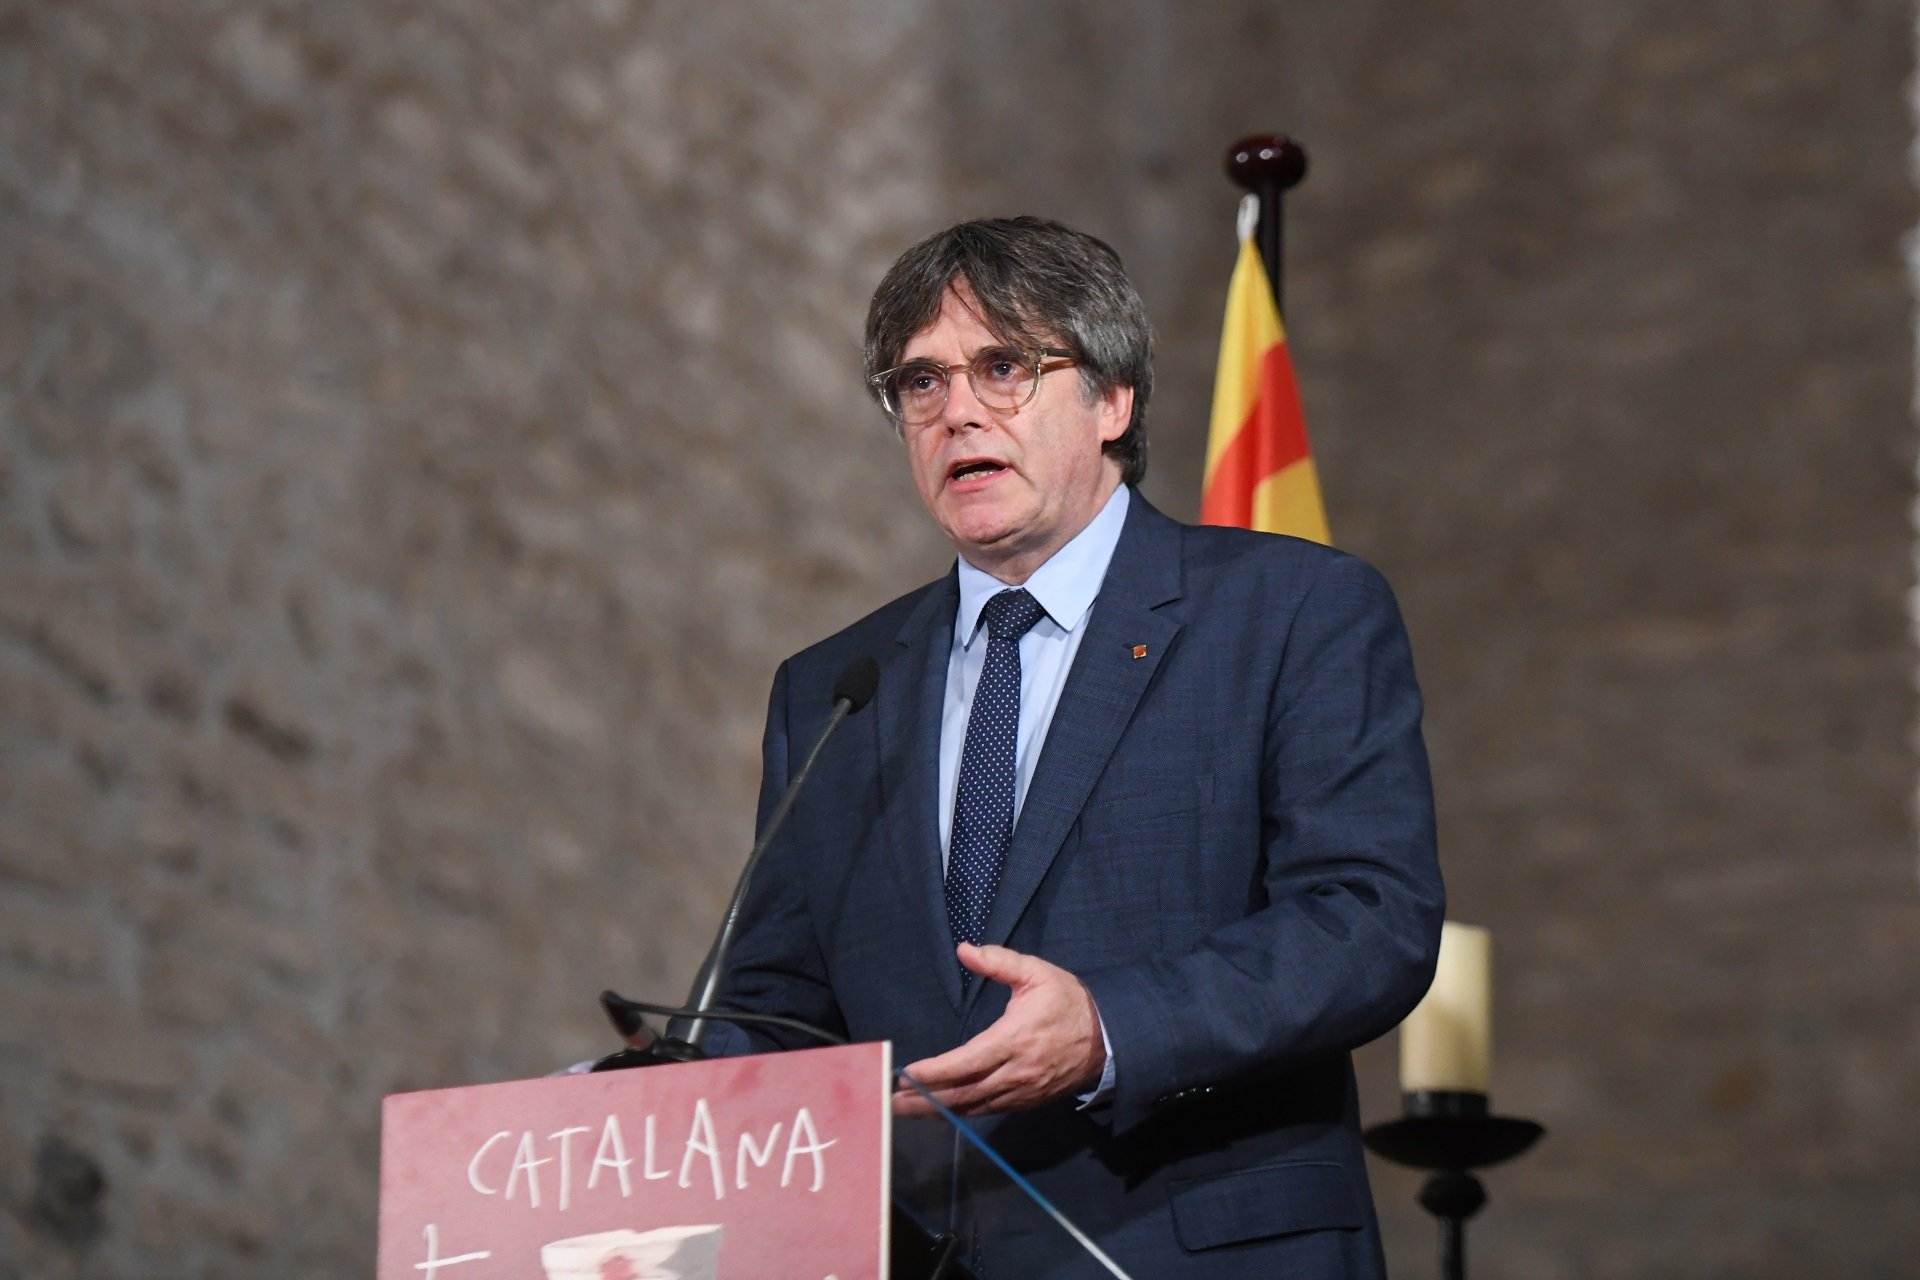 Tsunami case judge seeks to block Catalan amnesty by consulting European justice on terrorism